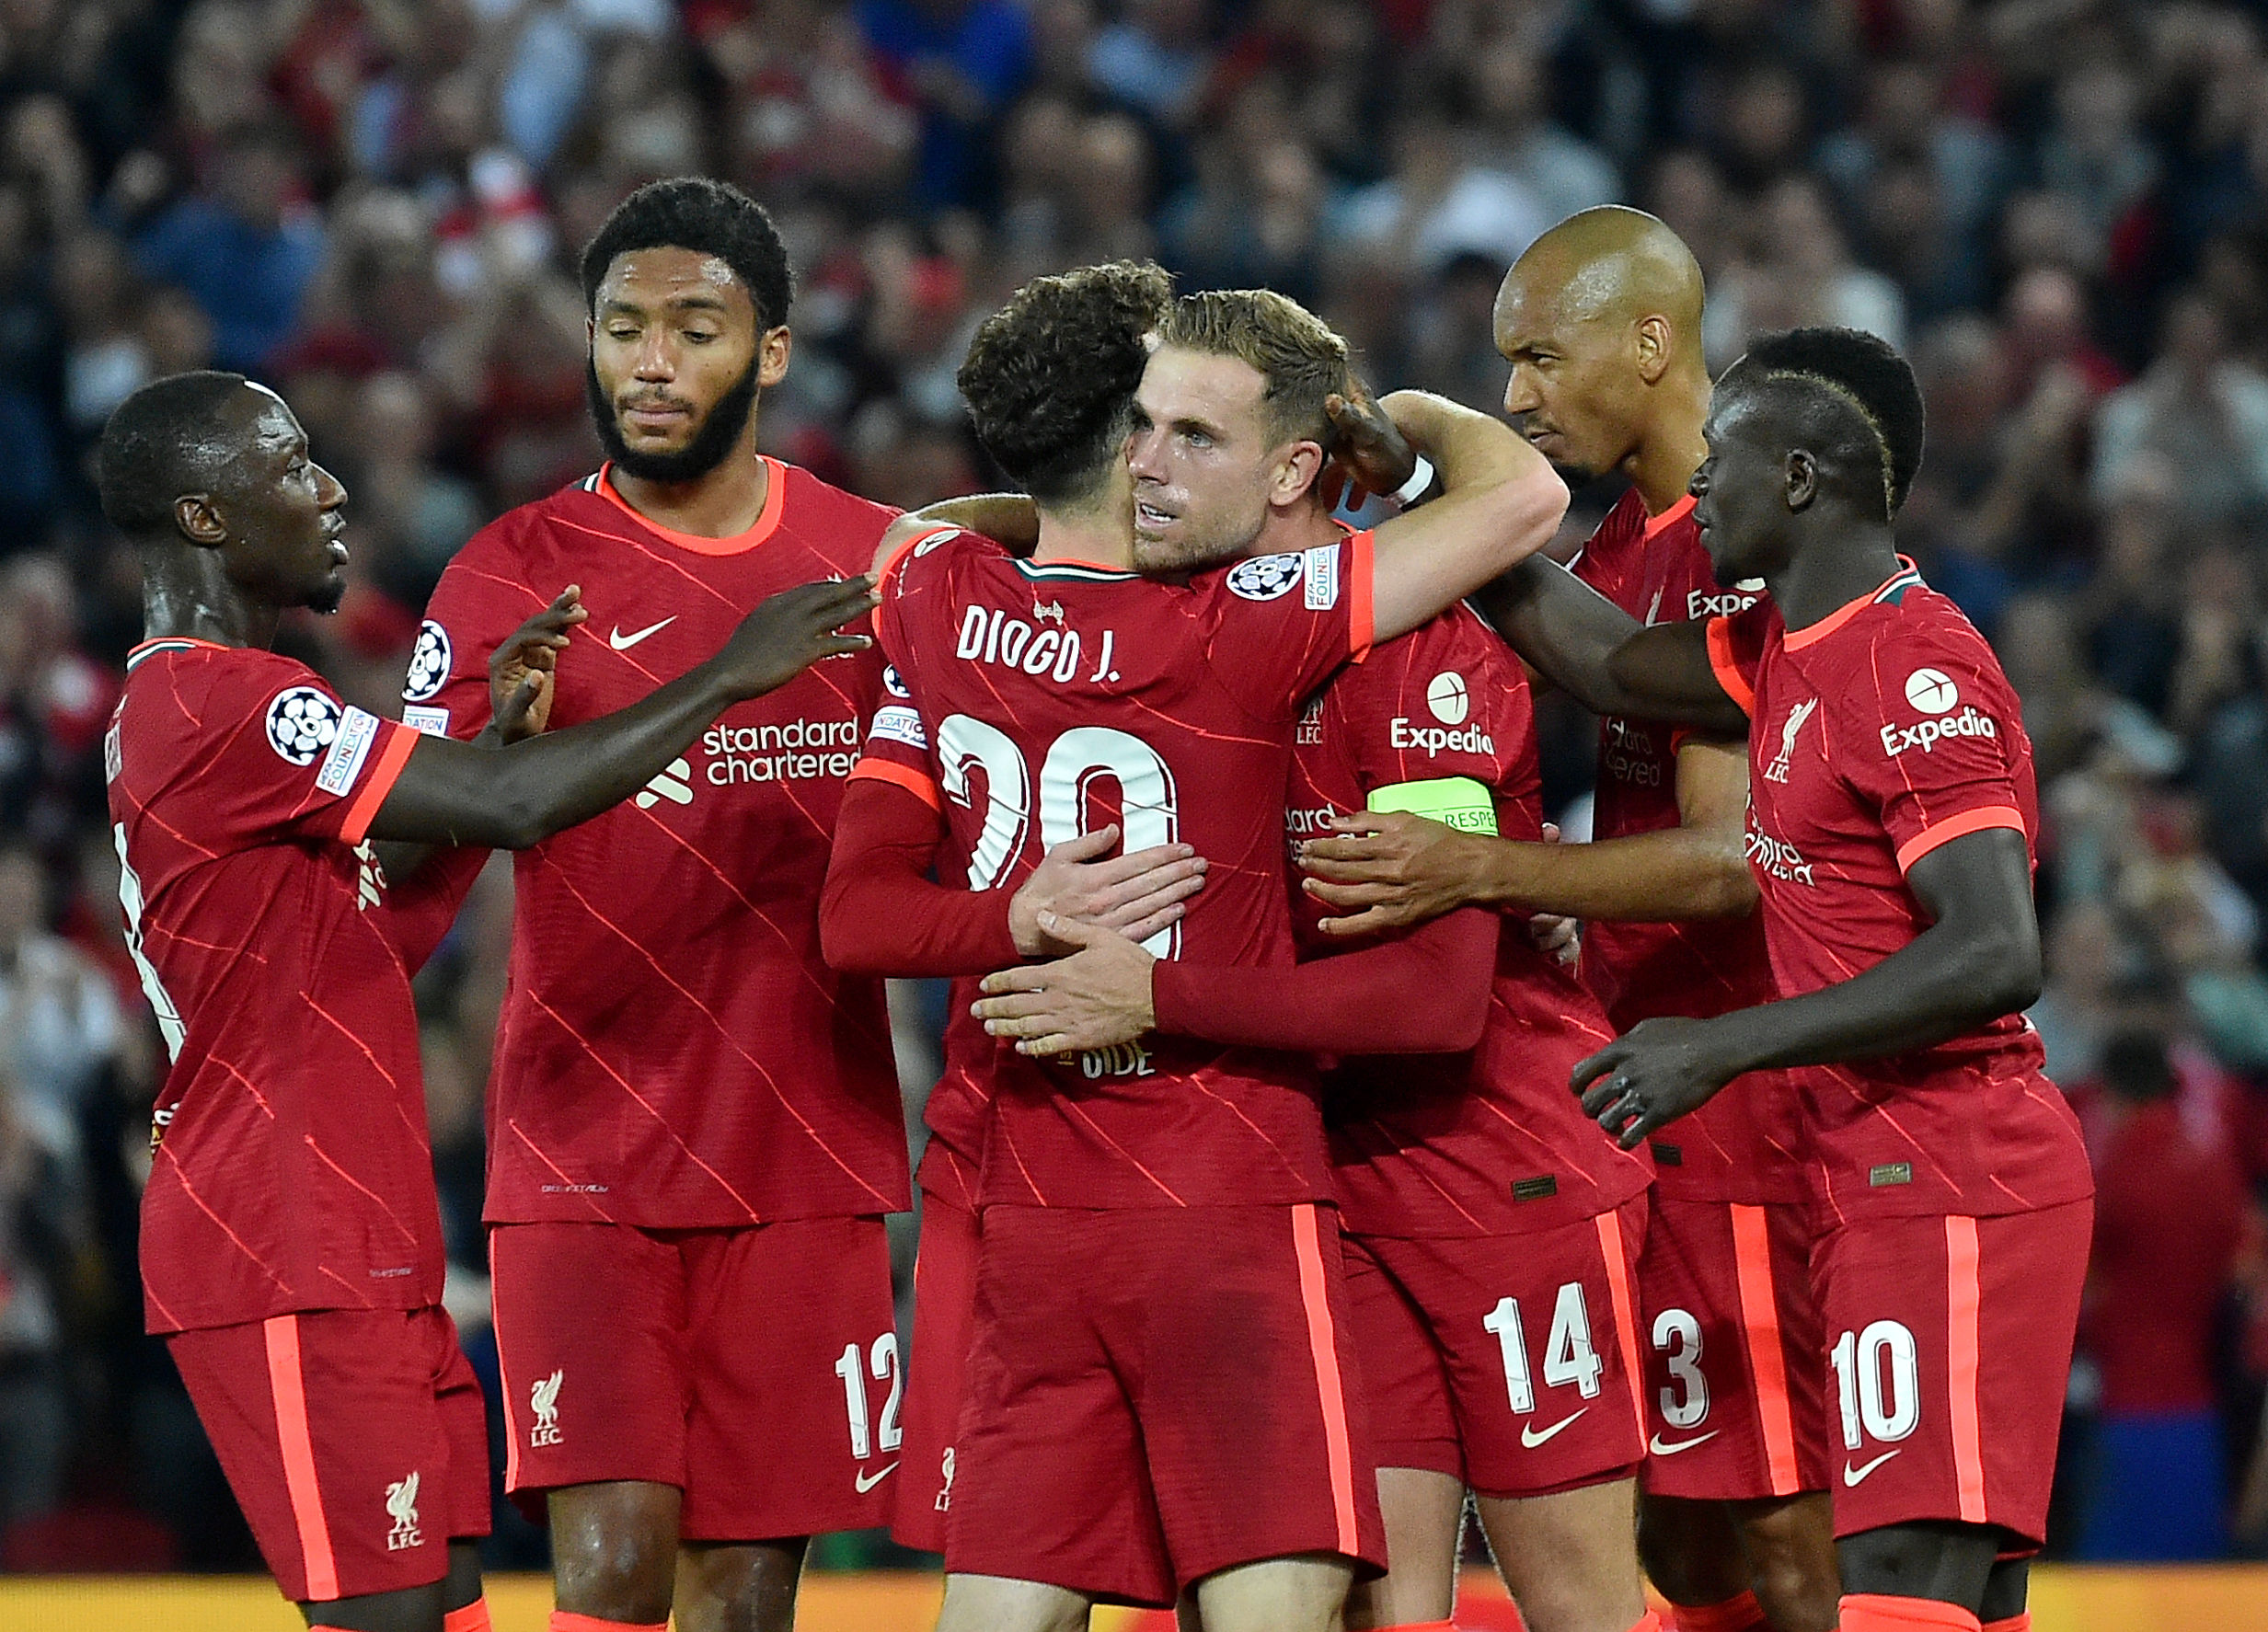 Let’s talk about seven, maybe?: Re-living Liverpool’s run to the UCL final